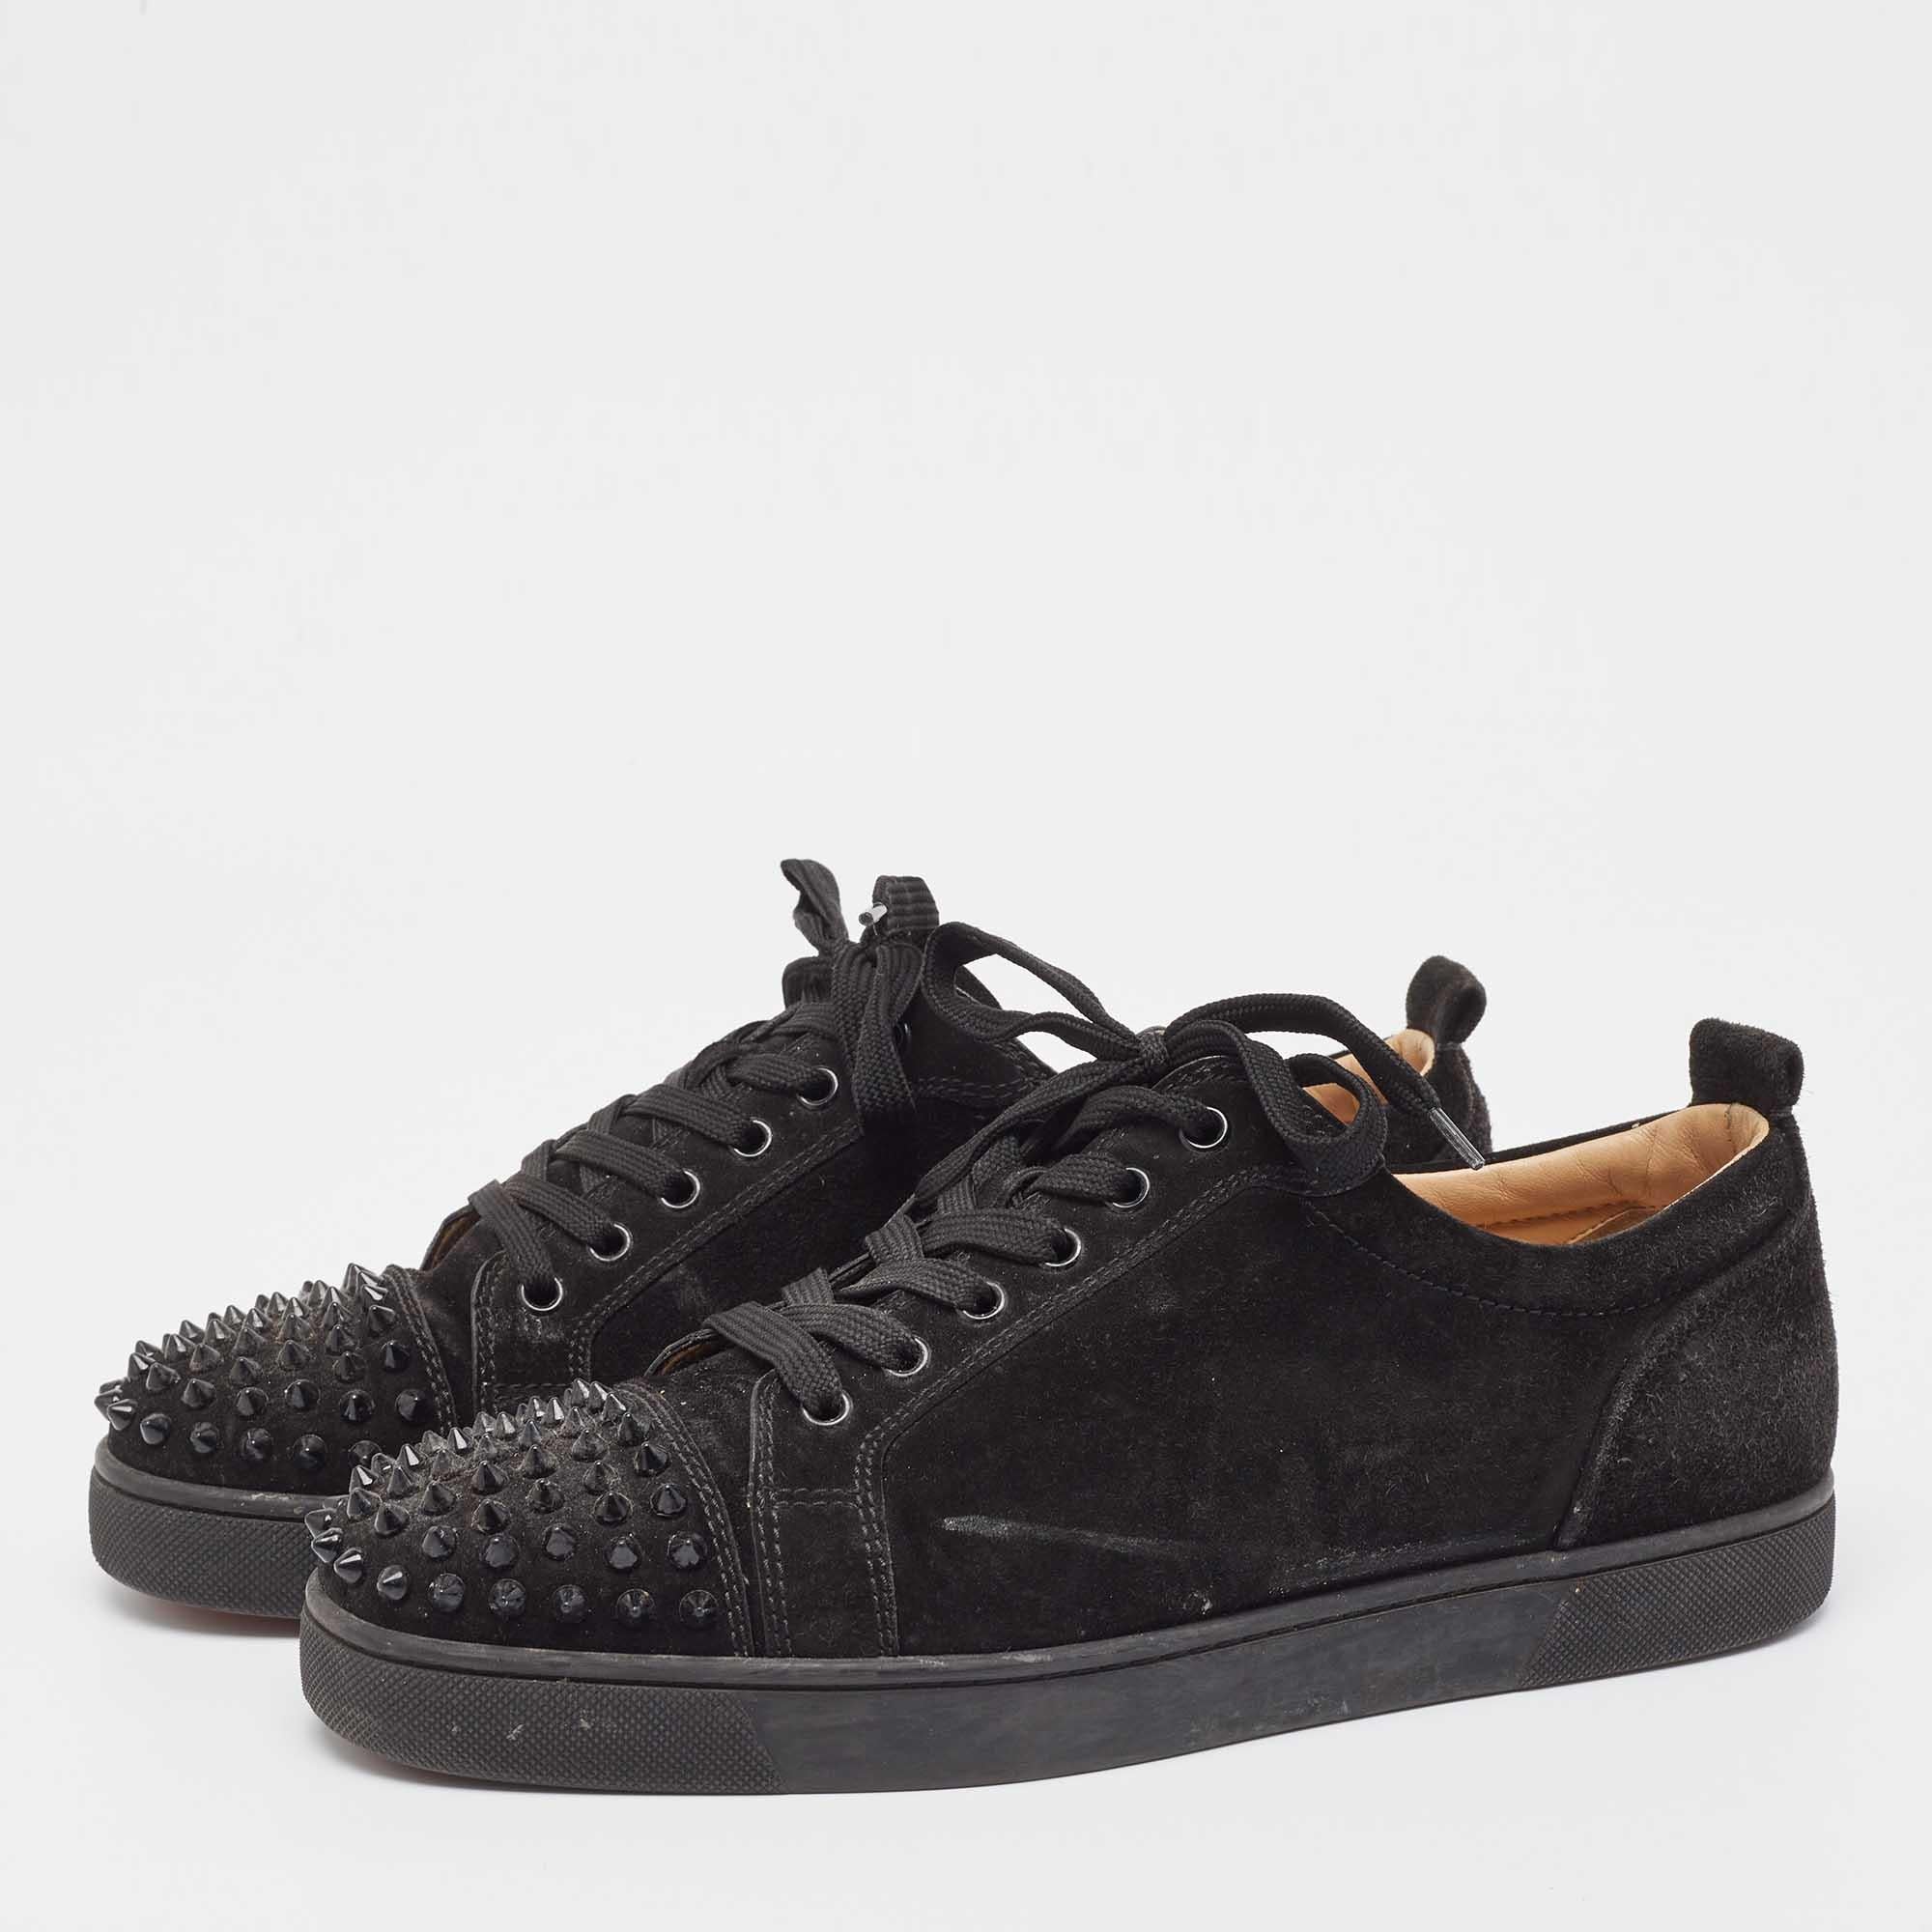 Christian Louboutin Black Suede Louise Spike Low Top Sneakers Size 43 For Sale 4